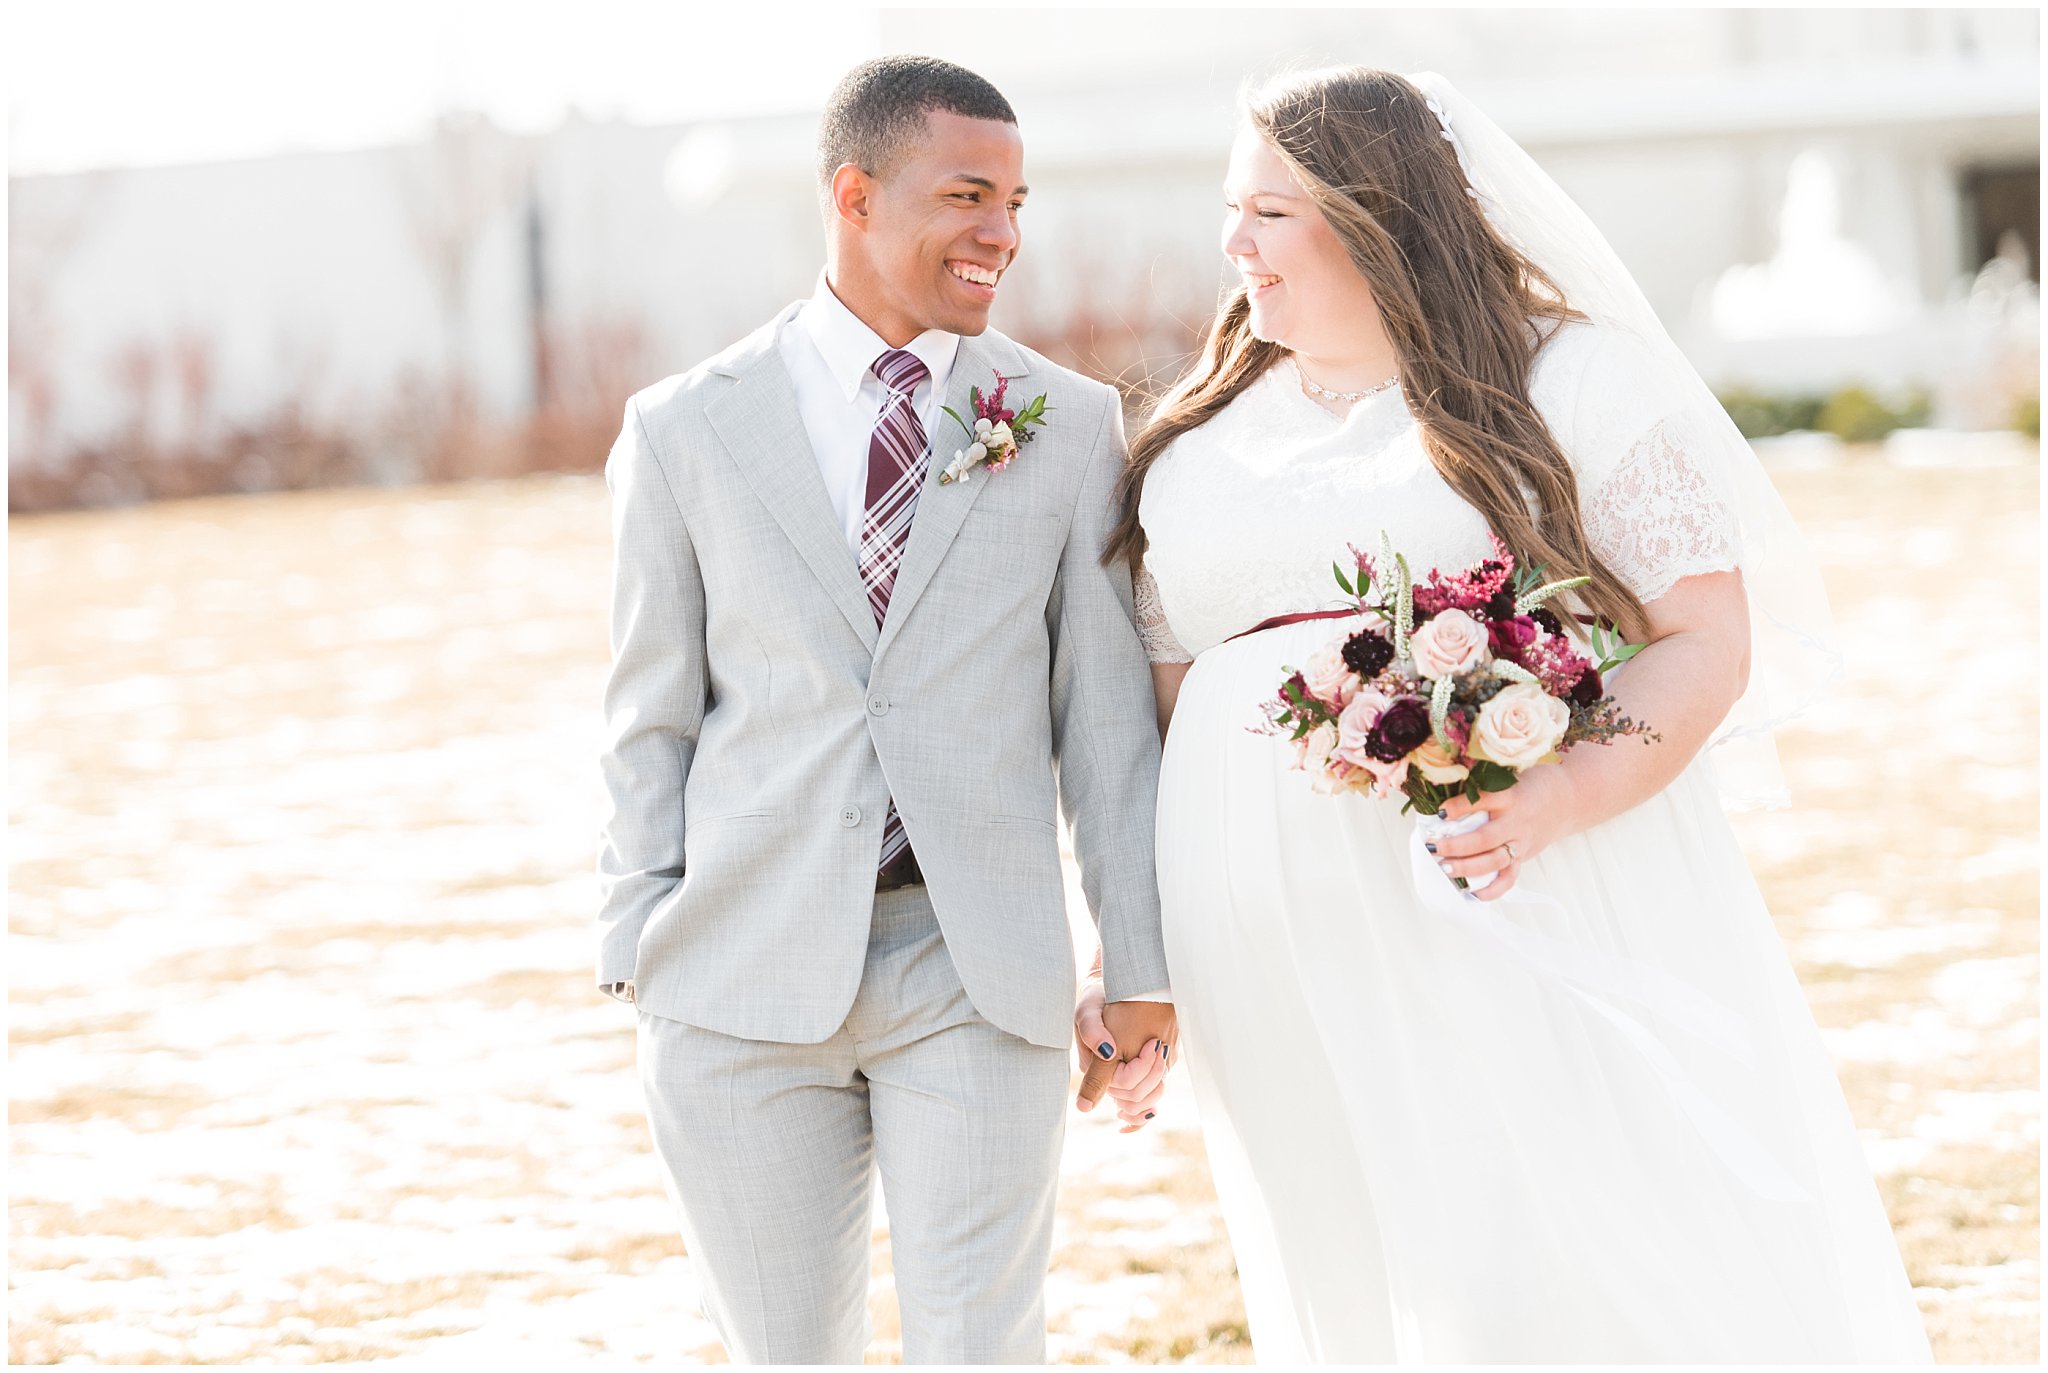 Bride and groom portraits with bride in a dress from Latterdaybride and groom in light grey suit | burgundy and quicksand rose bouquet by Dancing Daisies Floral | Jordan River Temple Winter Wedding | Jessie and Dallin Photography